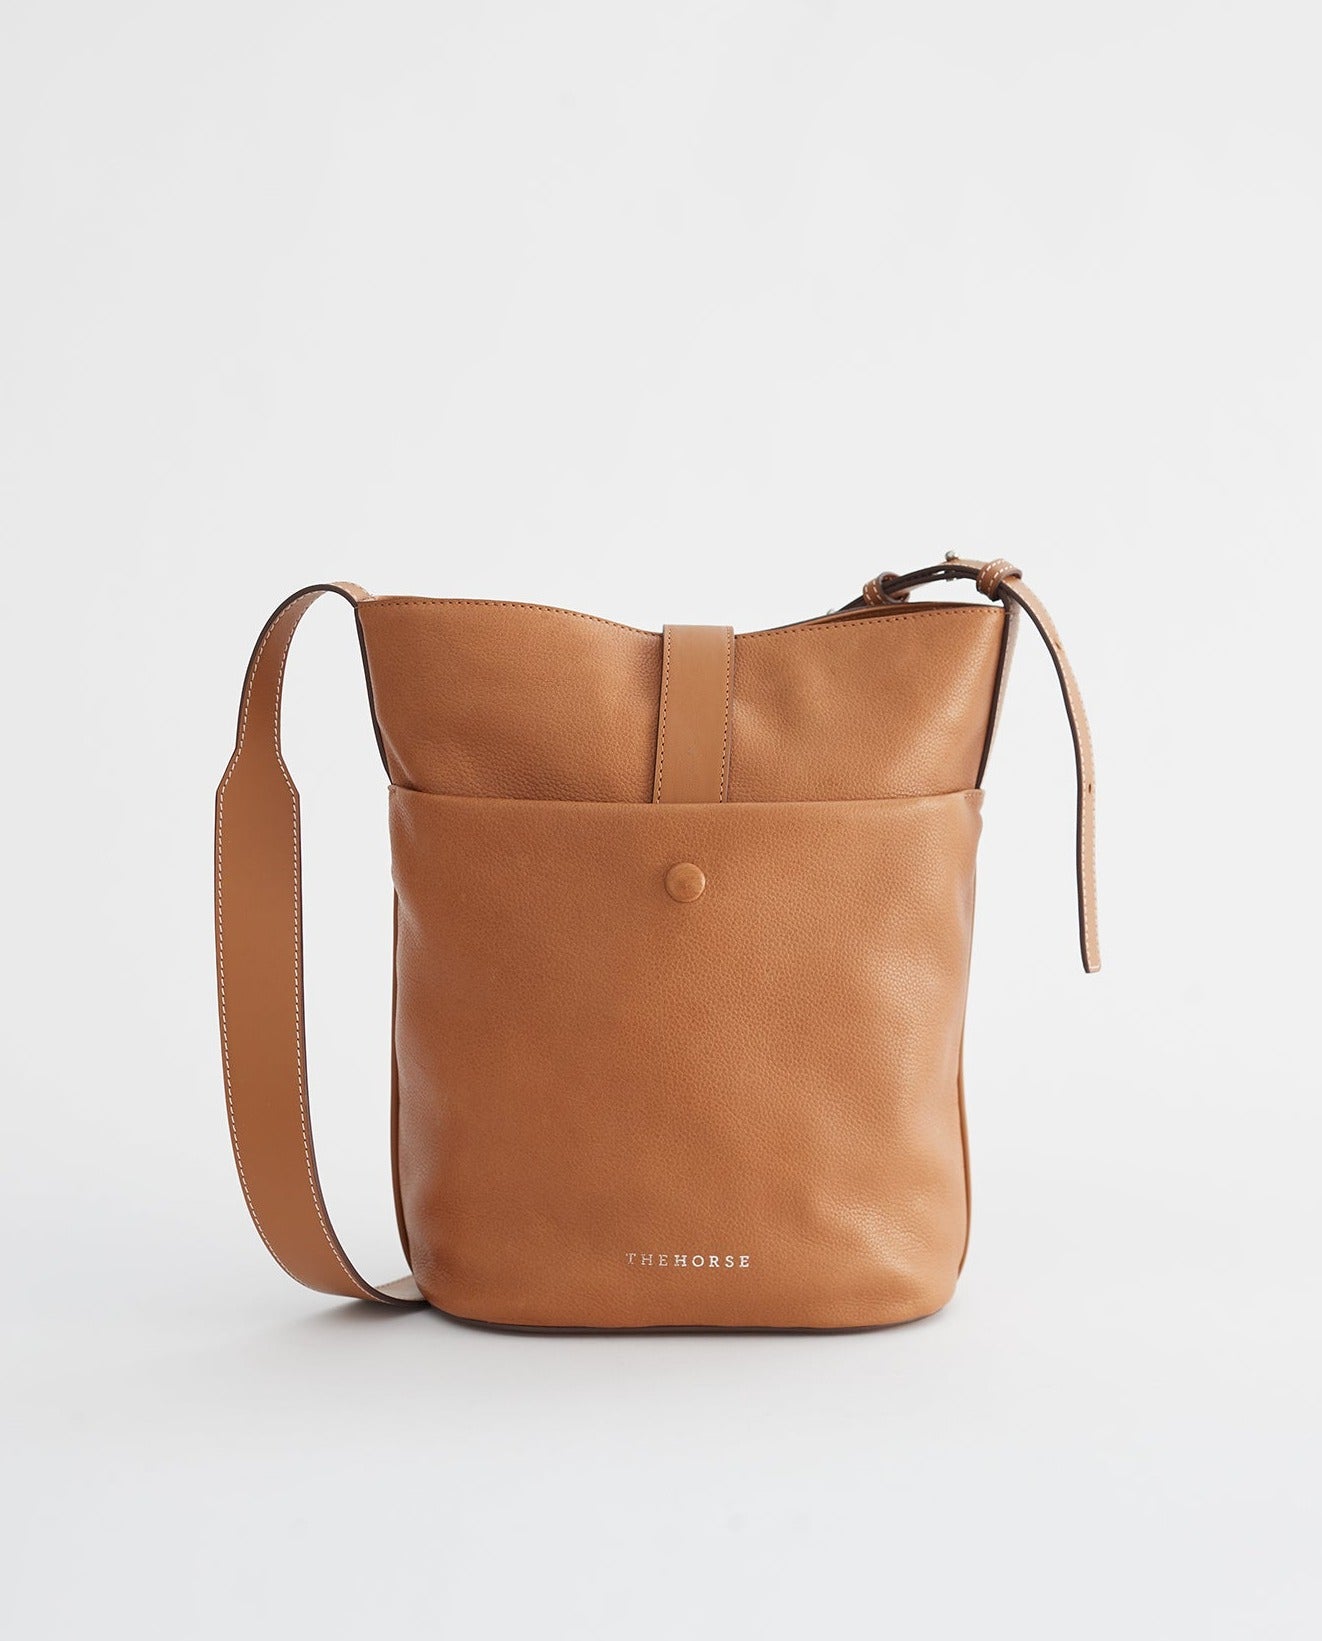 The Large Luella Bucket Bag in Caramel Leather by The Horse®